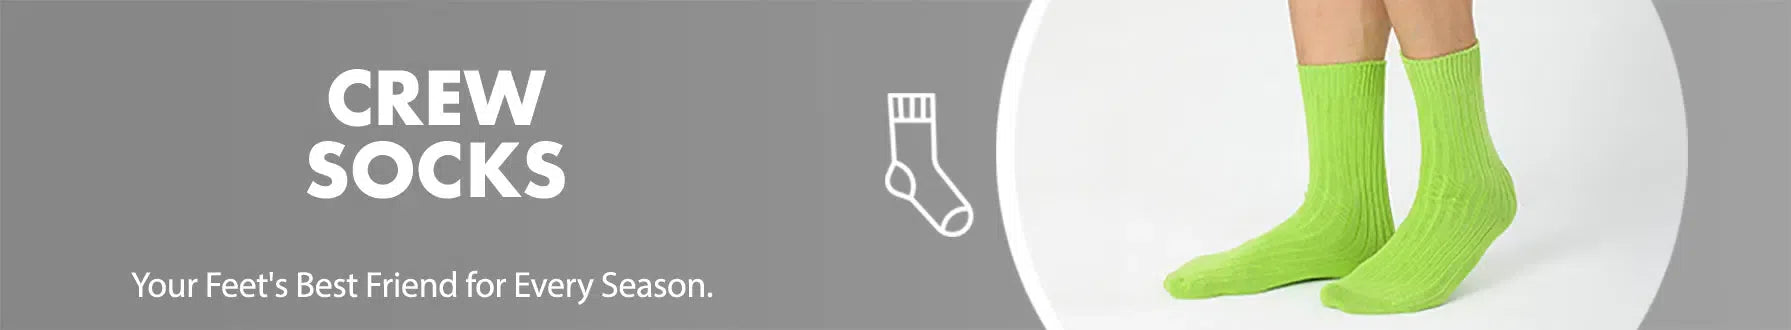 GoWith crew socks collection banner desktop